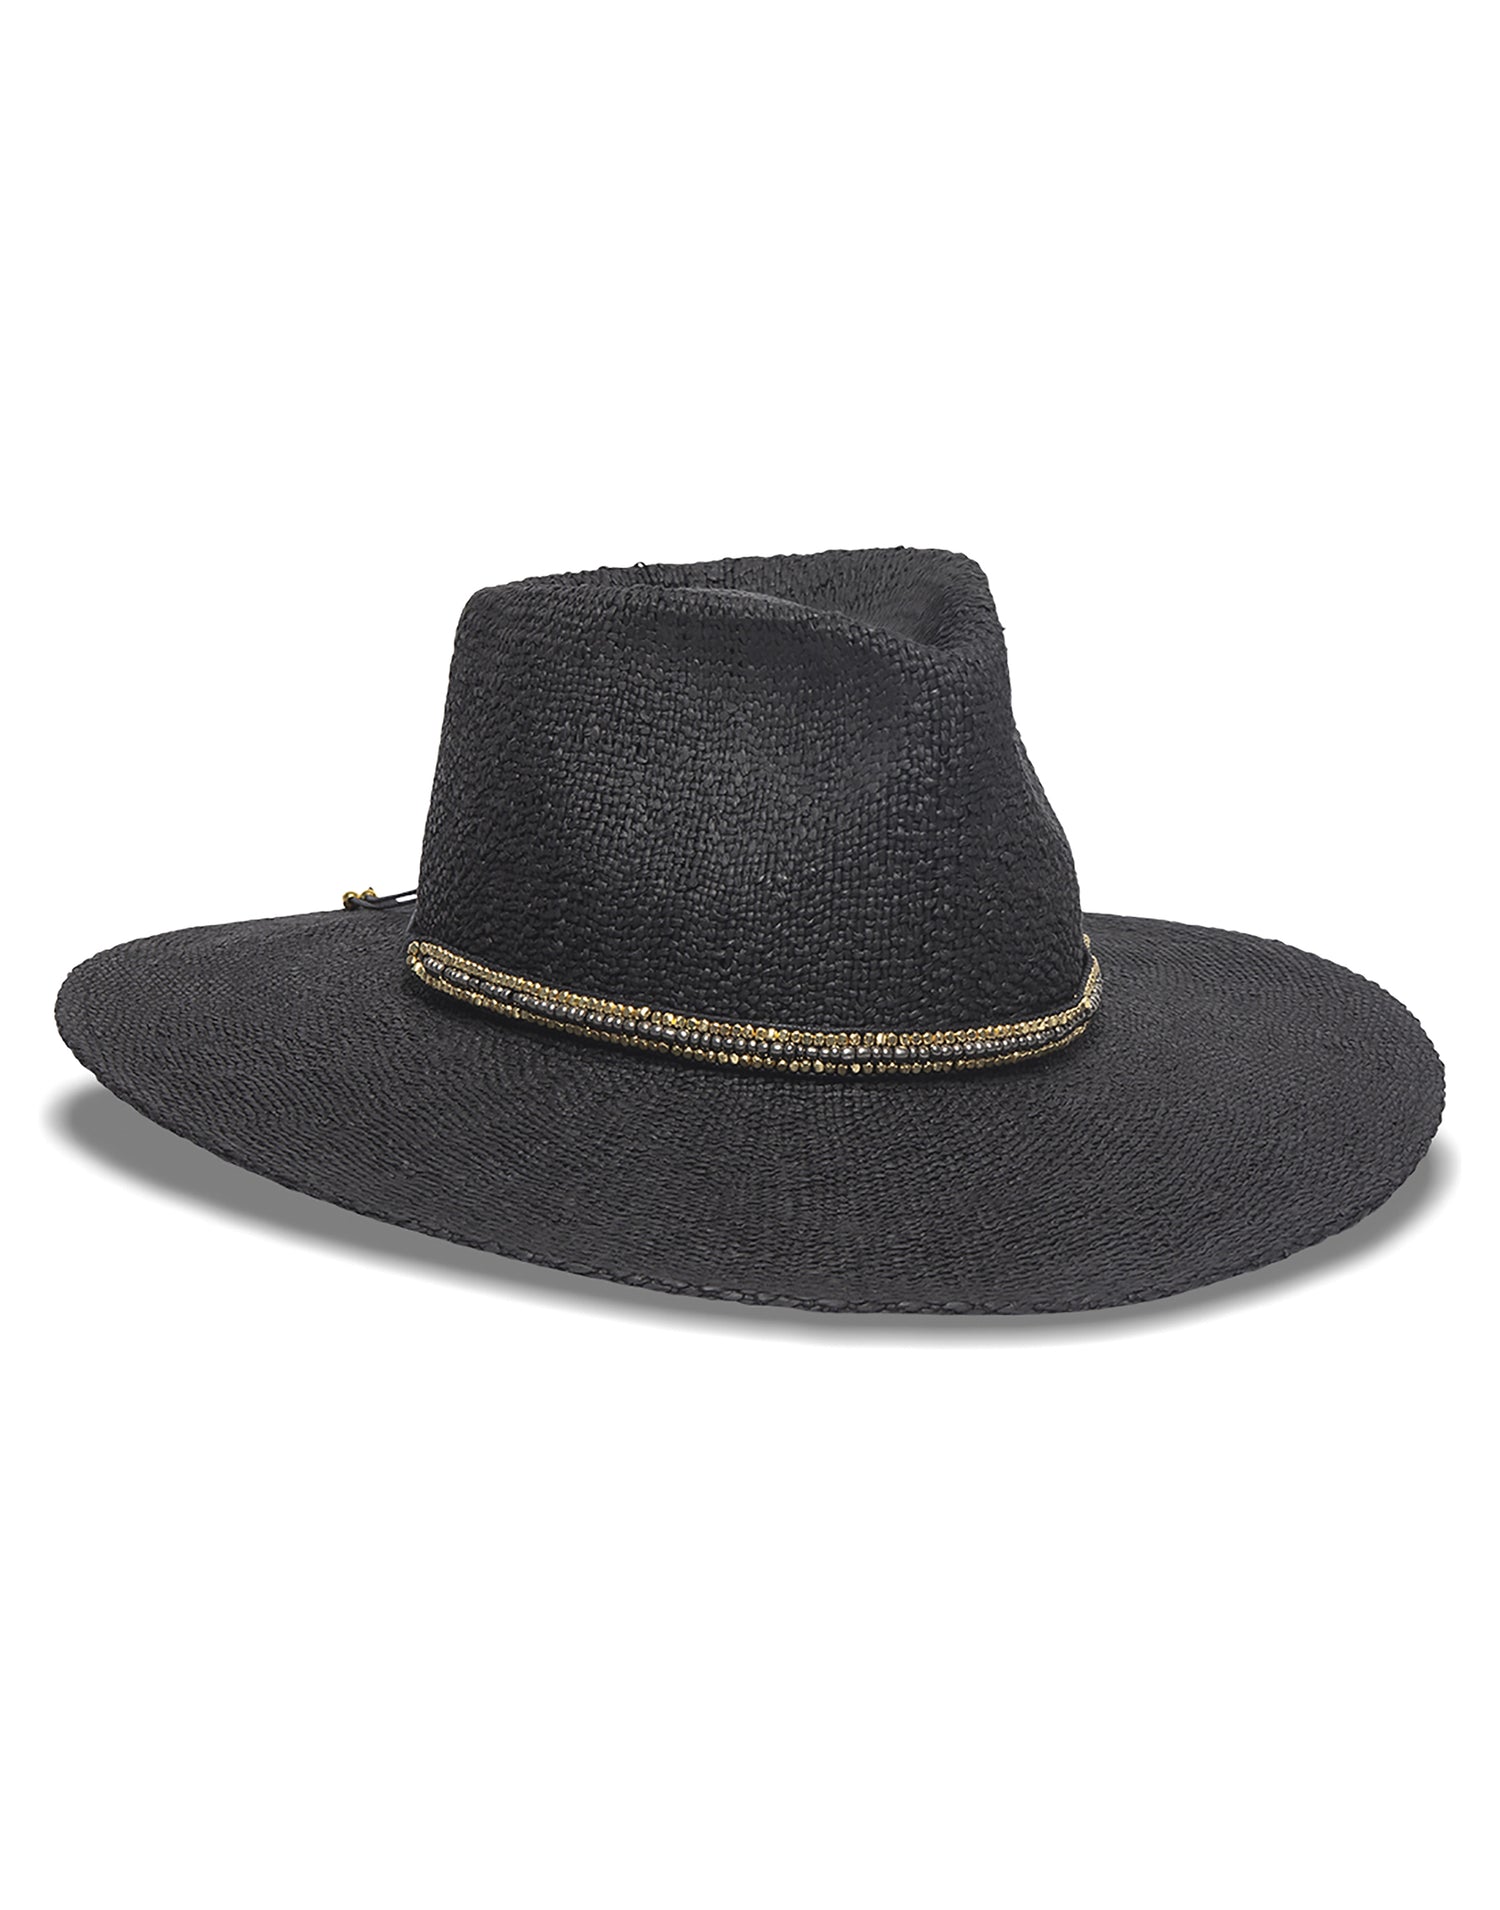 Nikki Beach's Monte Carlo Rancher Hat in Black with Metal Beaded Trim - product view 